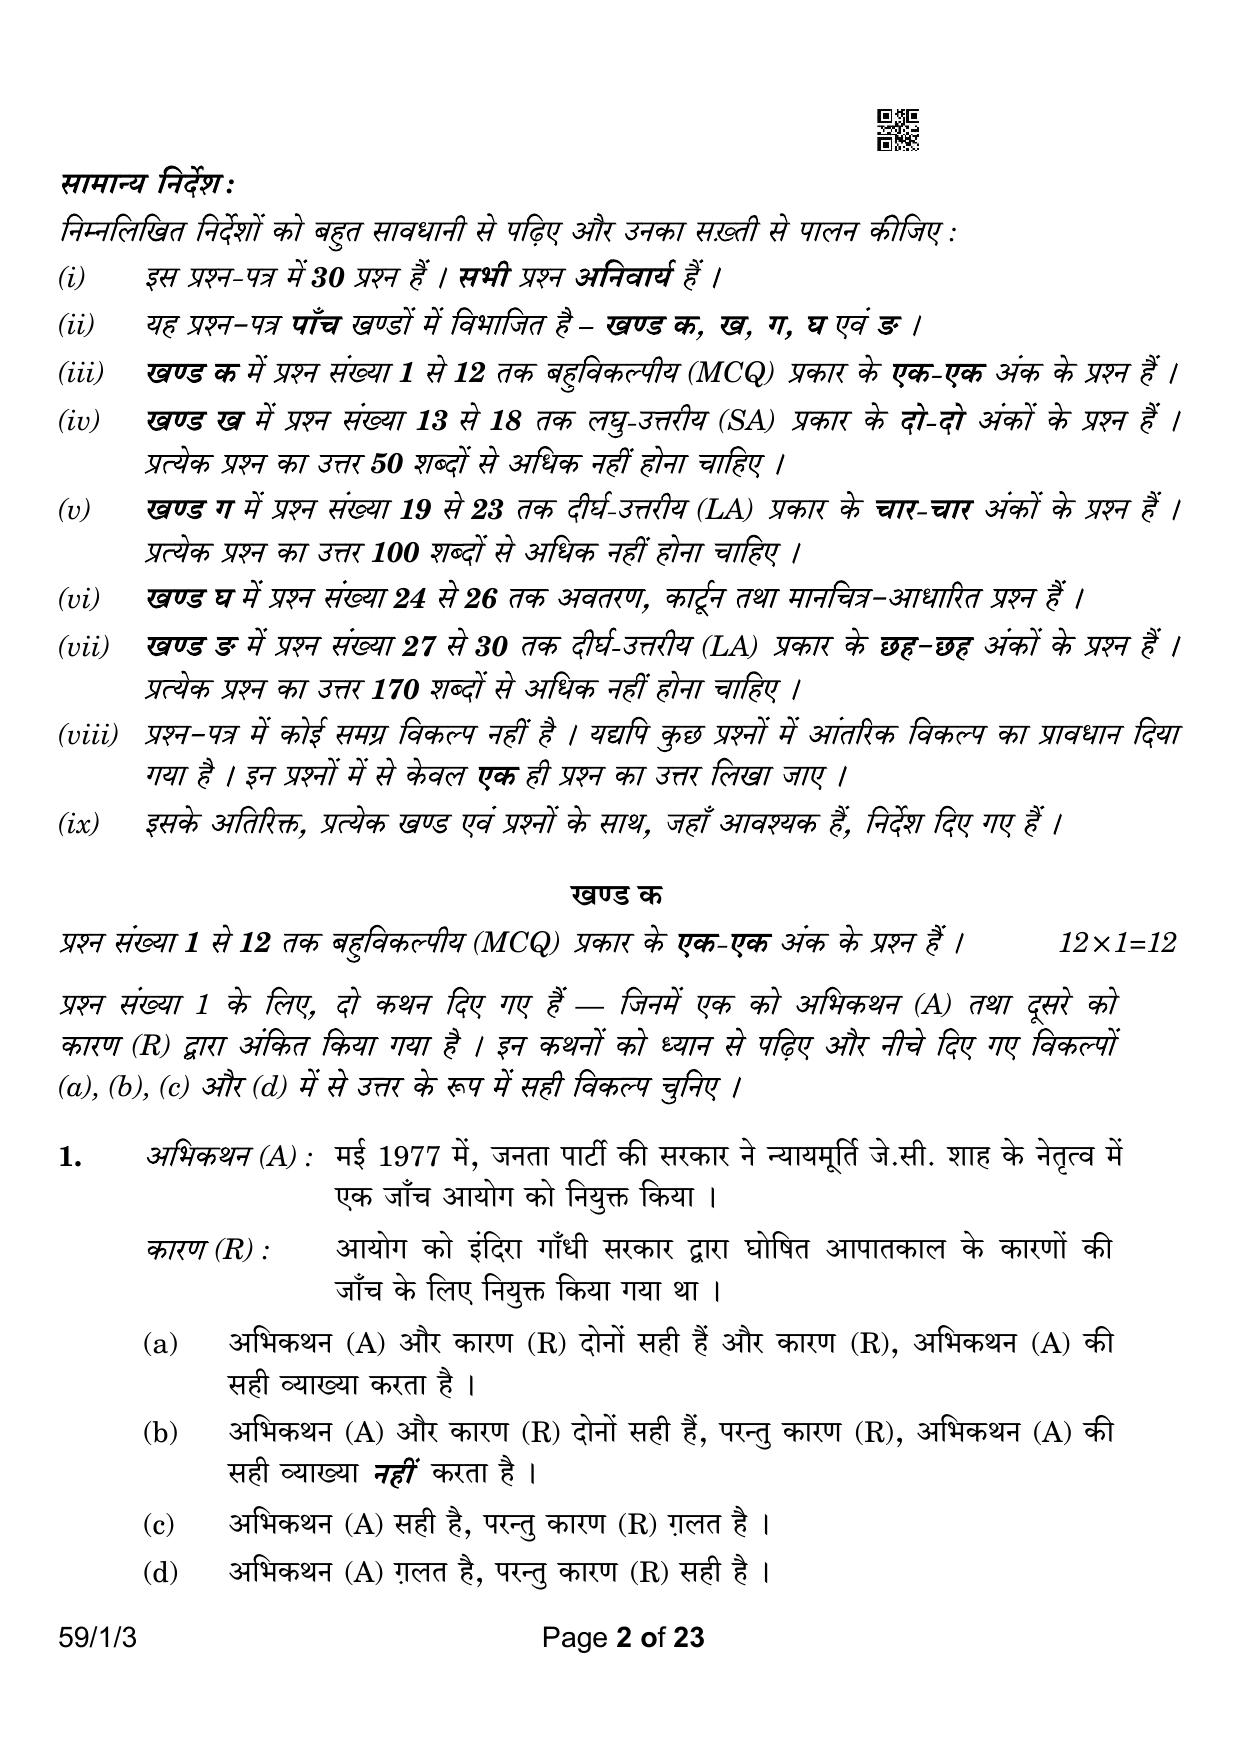 CBSE Class 12 59-1-3 Political Science 2023 Question Paper - Page 2